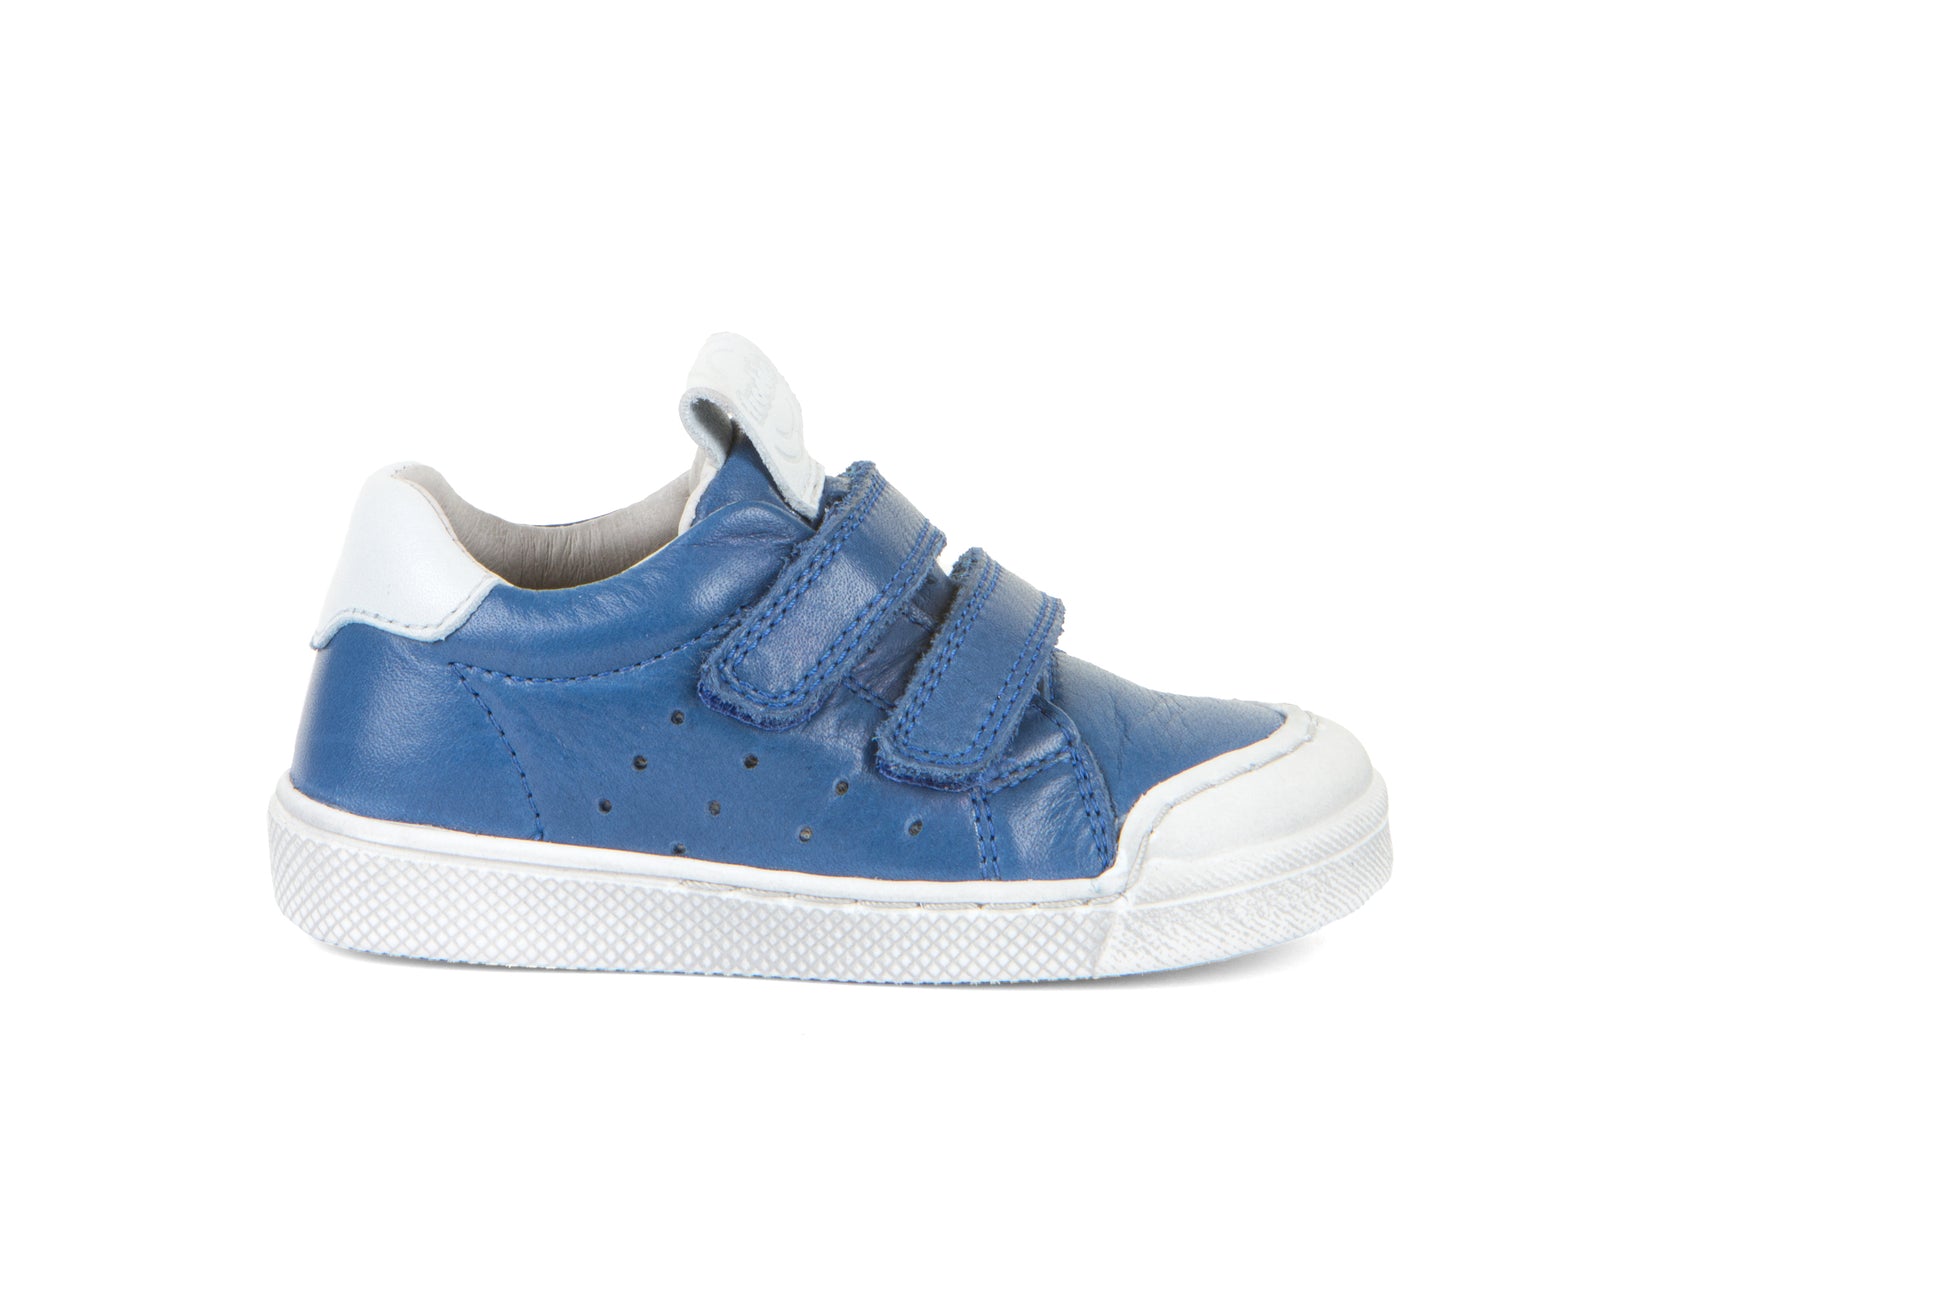 A boys casual shoe by Froddo, style G2130290-1 Rosario, in blue with white trim, double velcro fastening. Right side view.